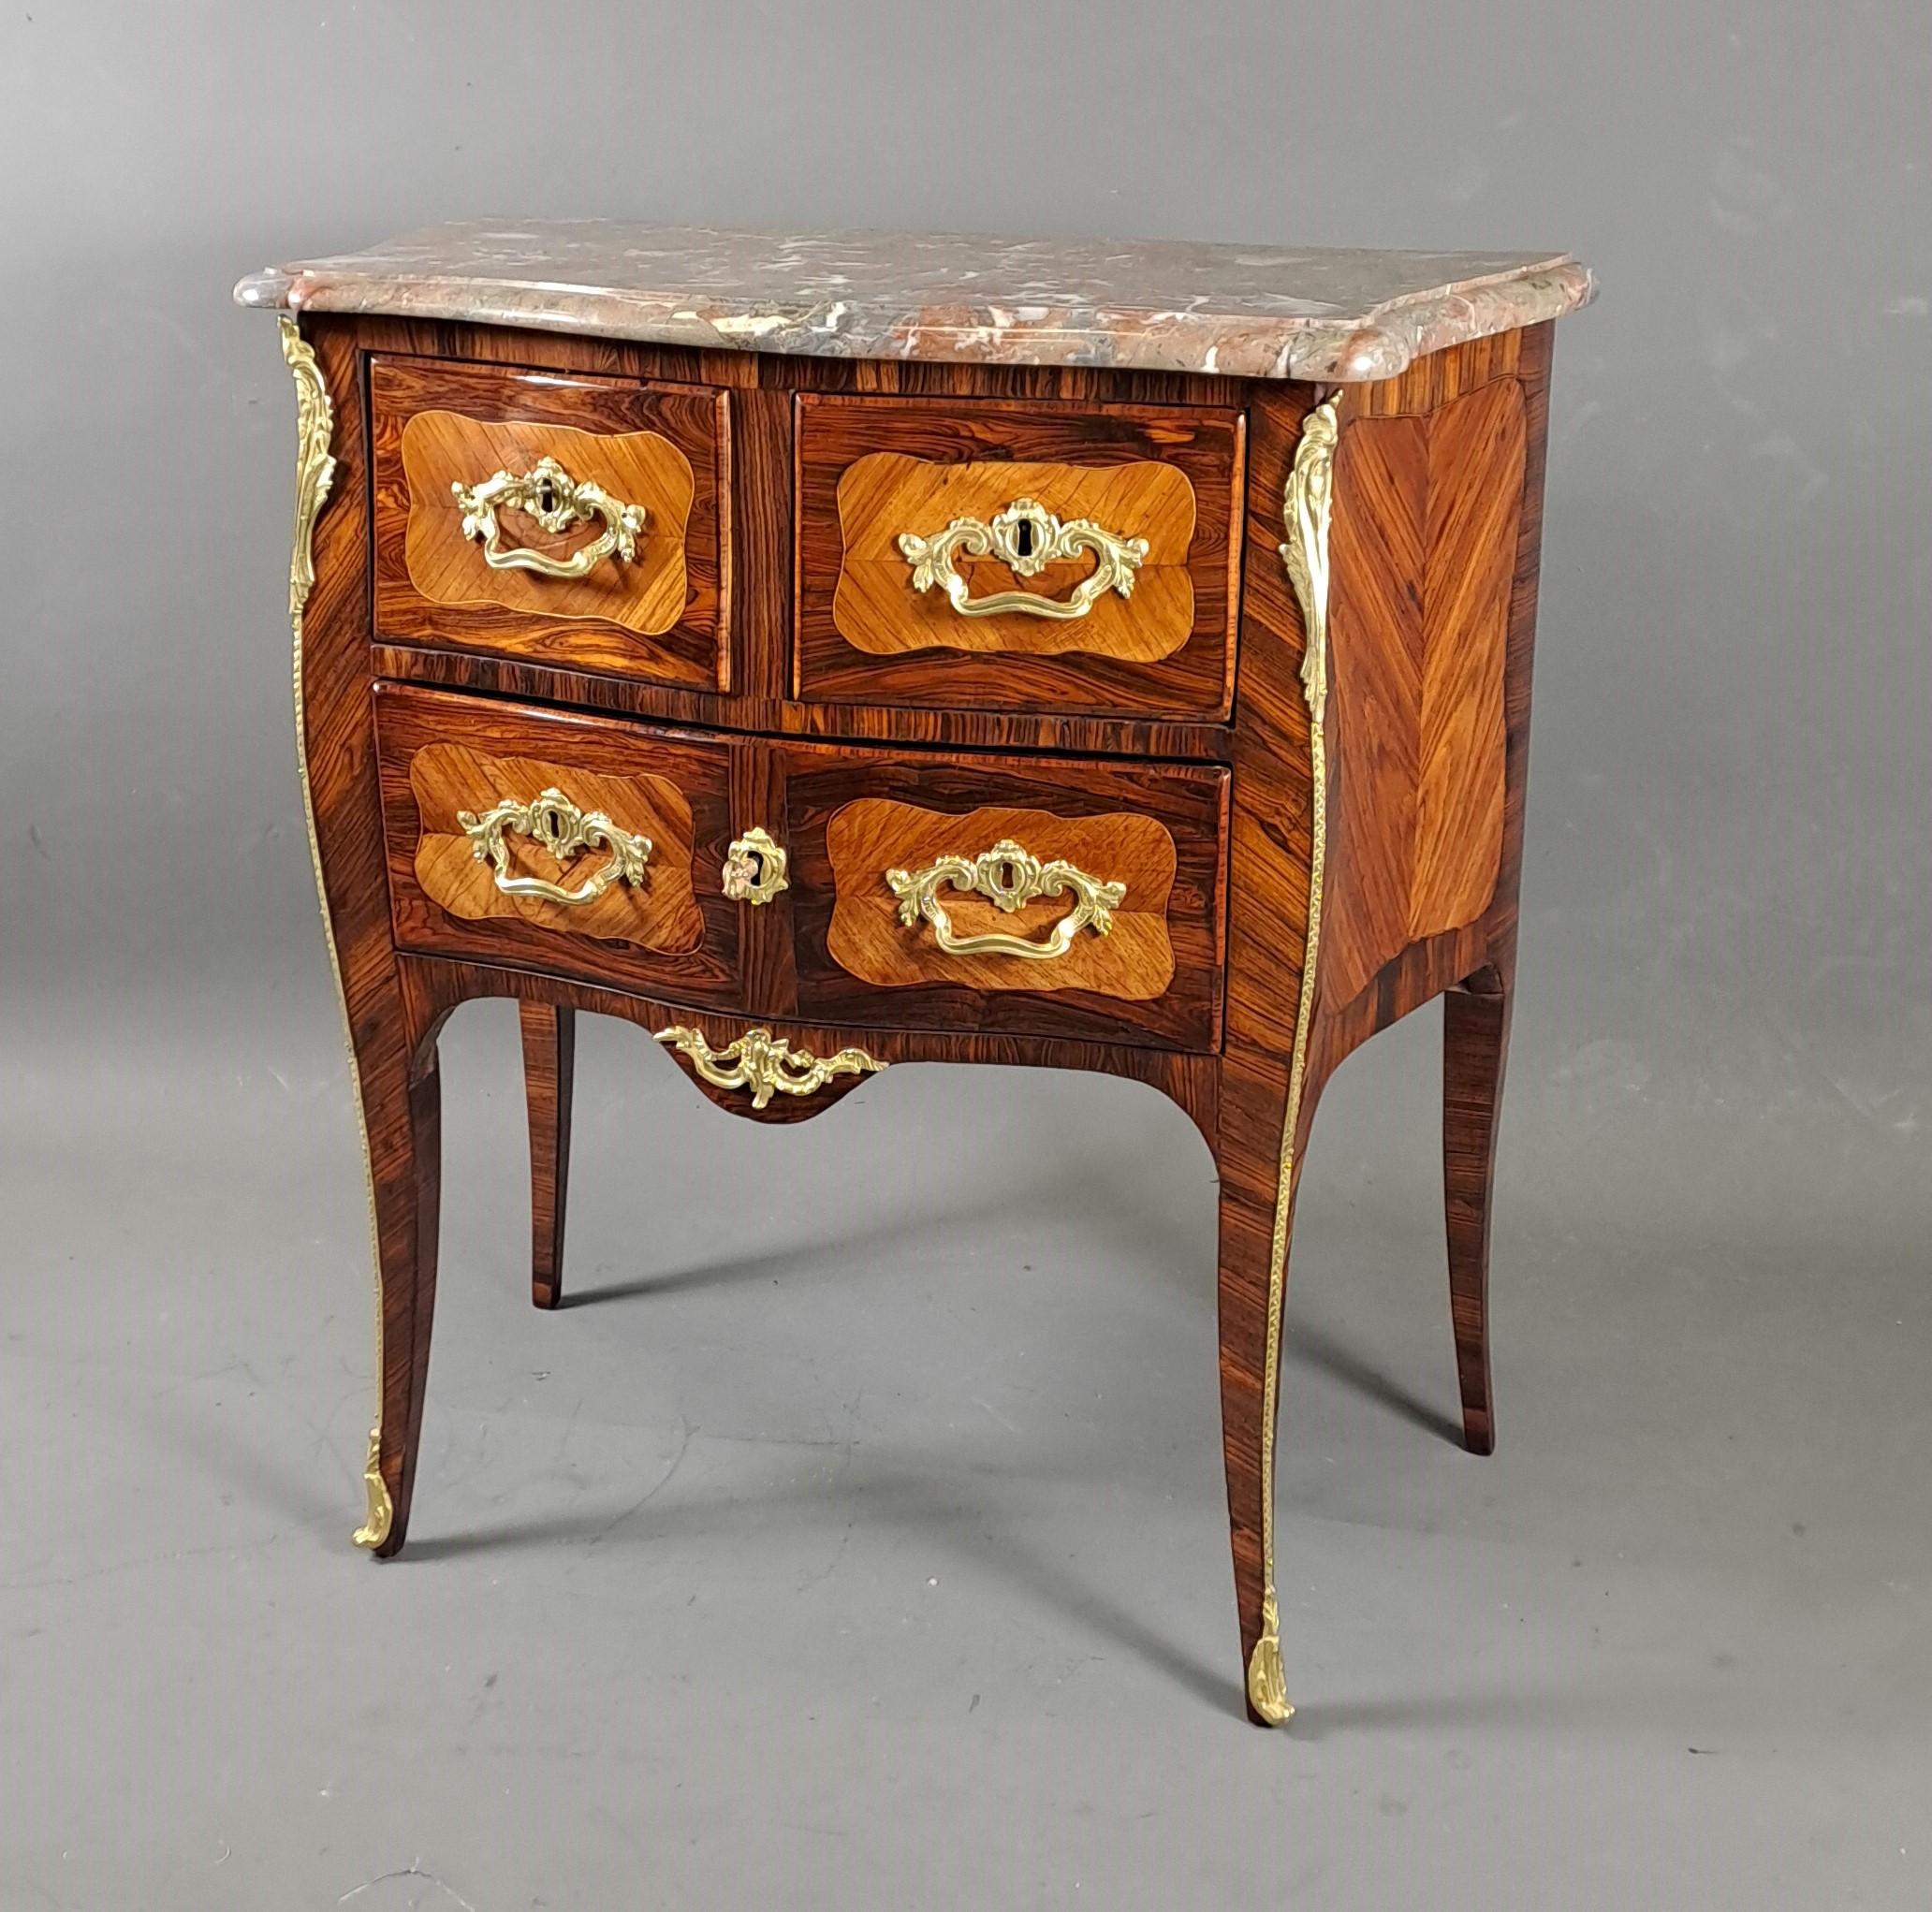 Lovely little Louis XV commode scurved on all sides in rosewood marquetry in curling in scrolled reserves, highlighted with light wood fillets on a rosewood background.
Opening three drawers in two rows.

Flanders marble top molded in Bec de